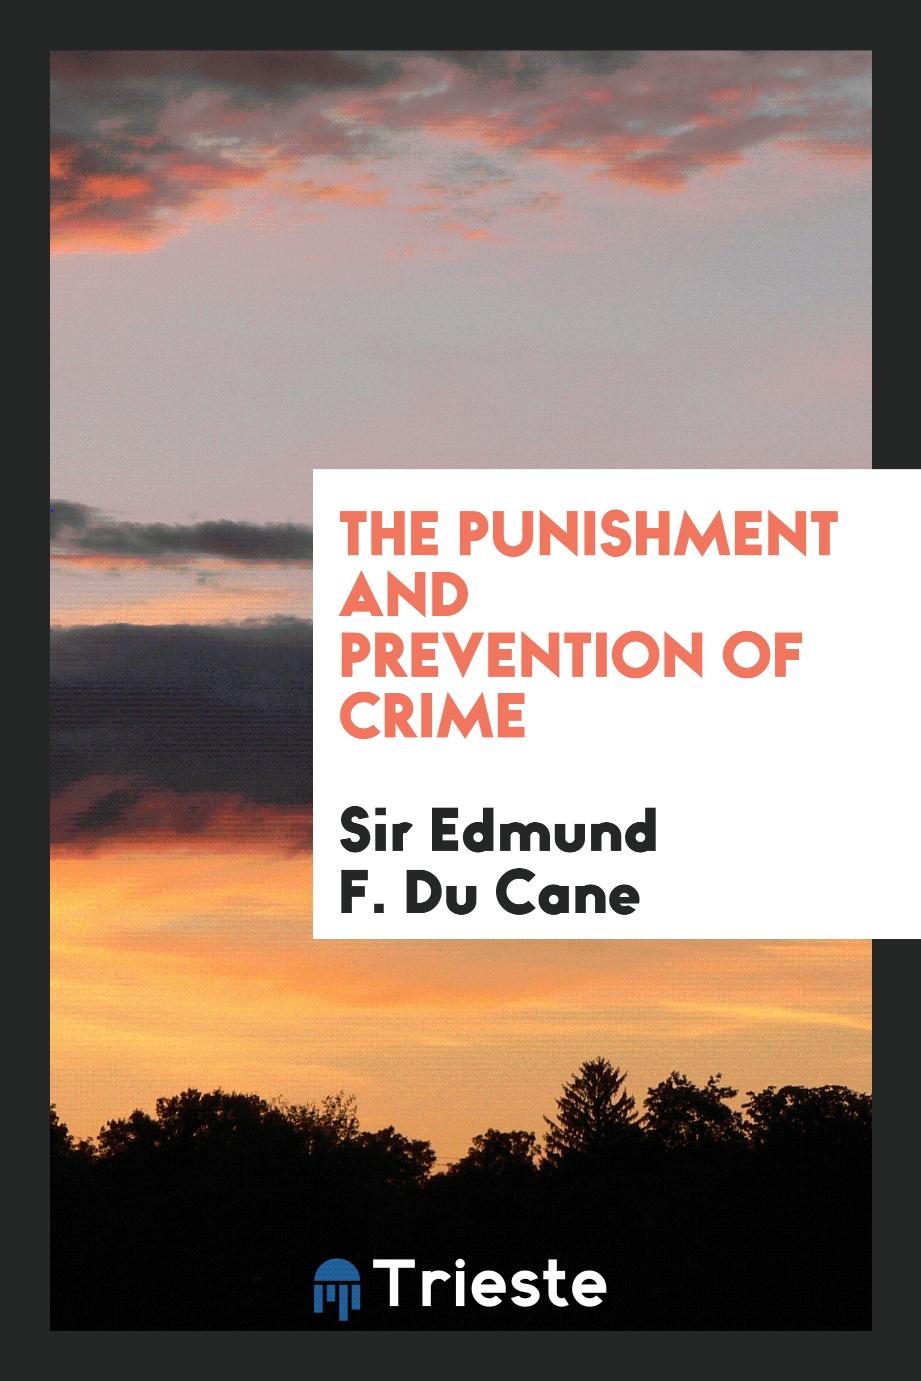 The punishment and prevention of crime